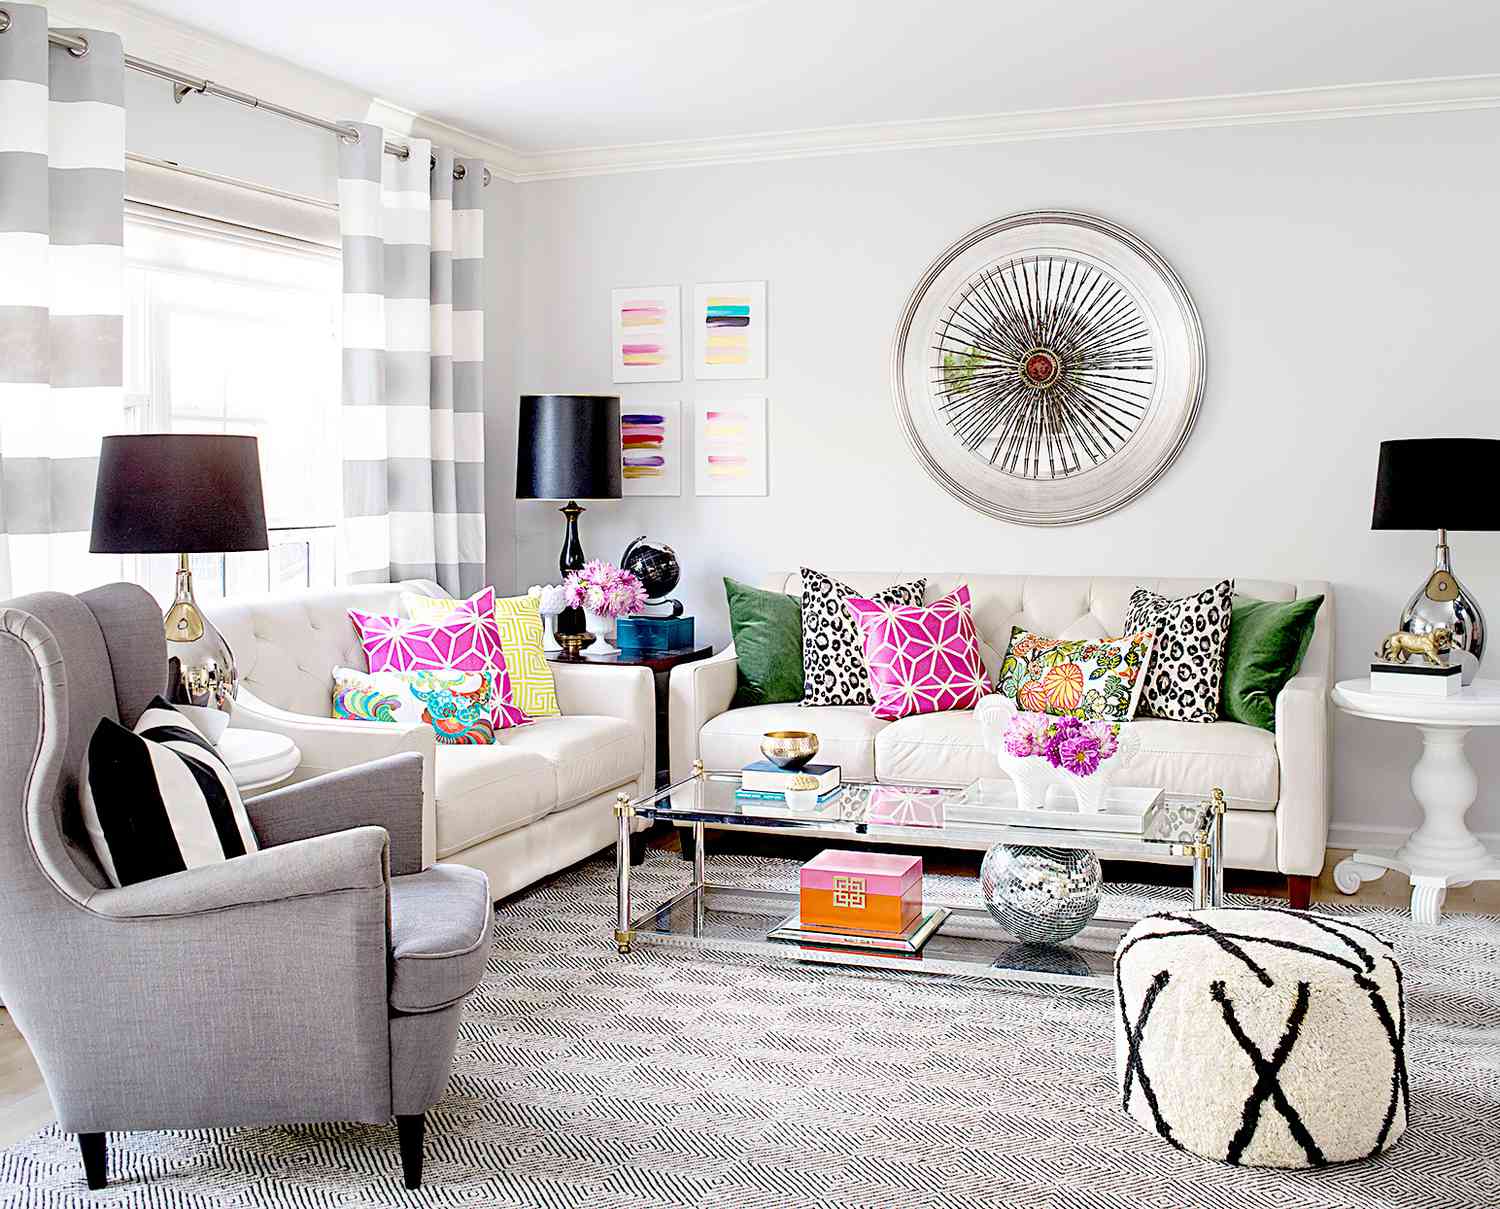 Living room with colorful pillows and large wall art